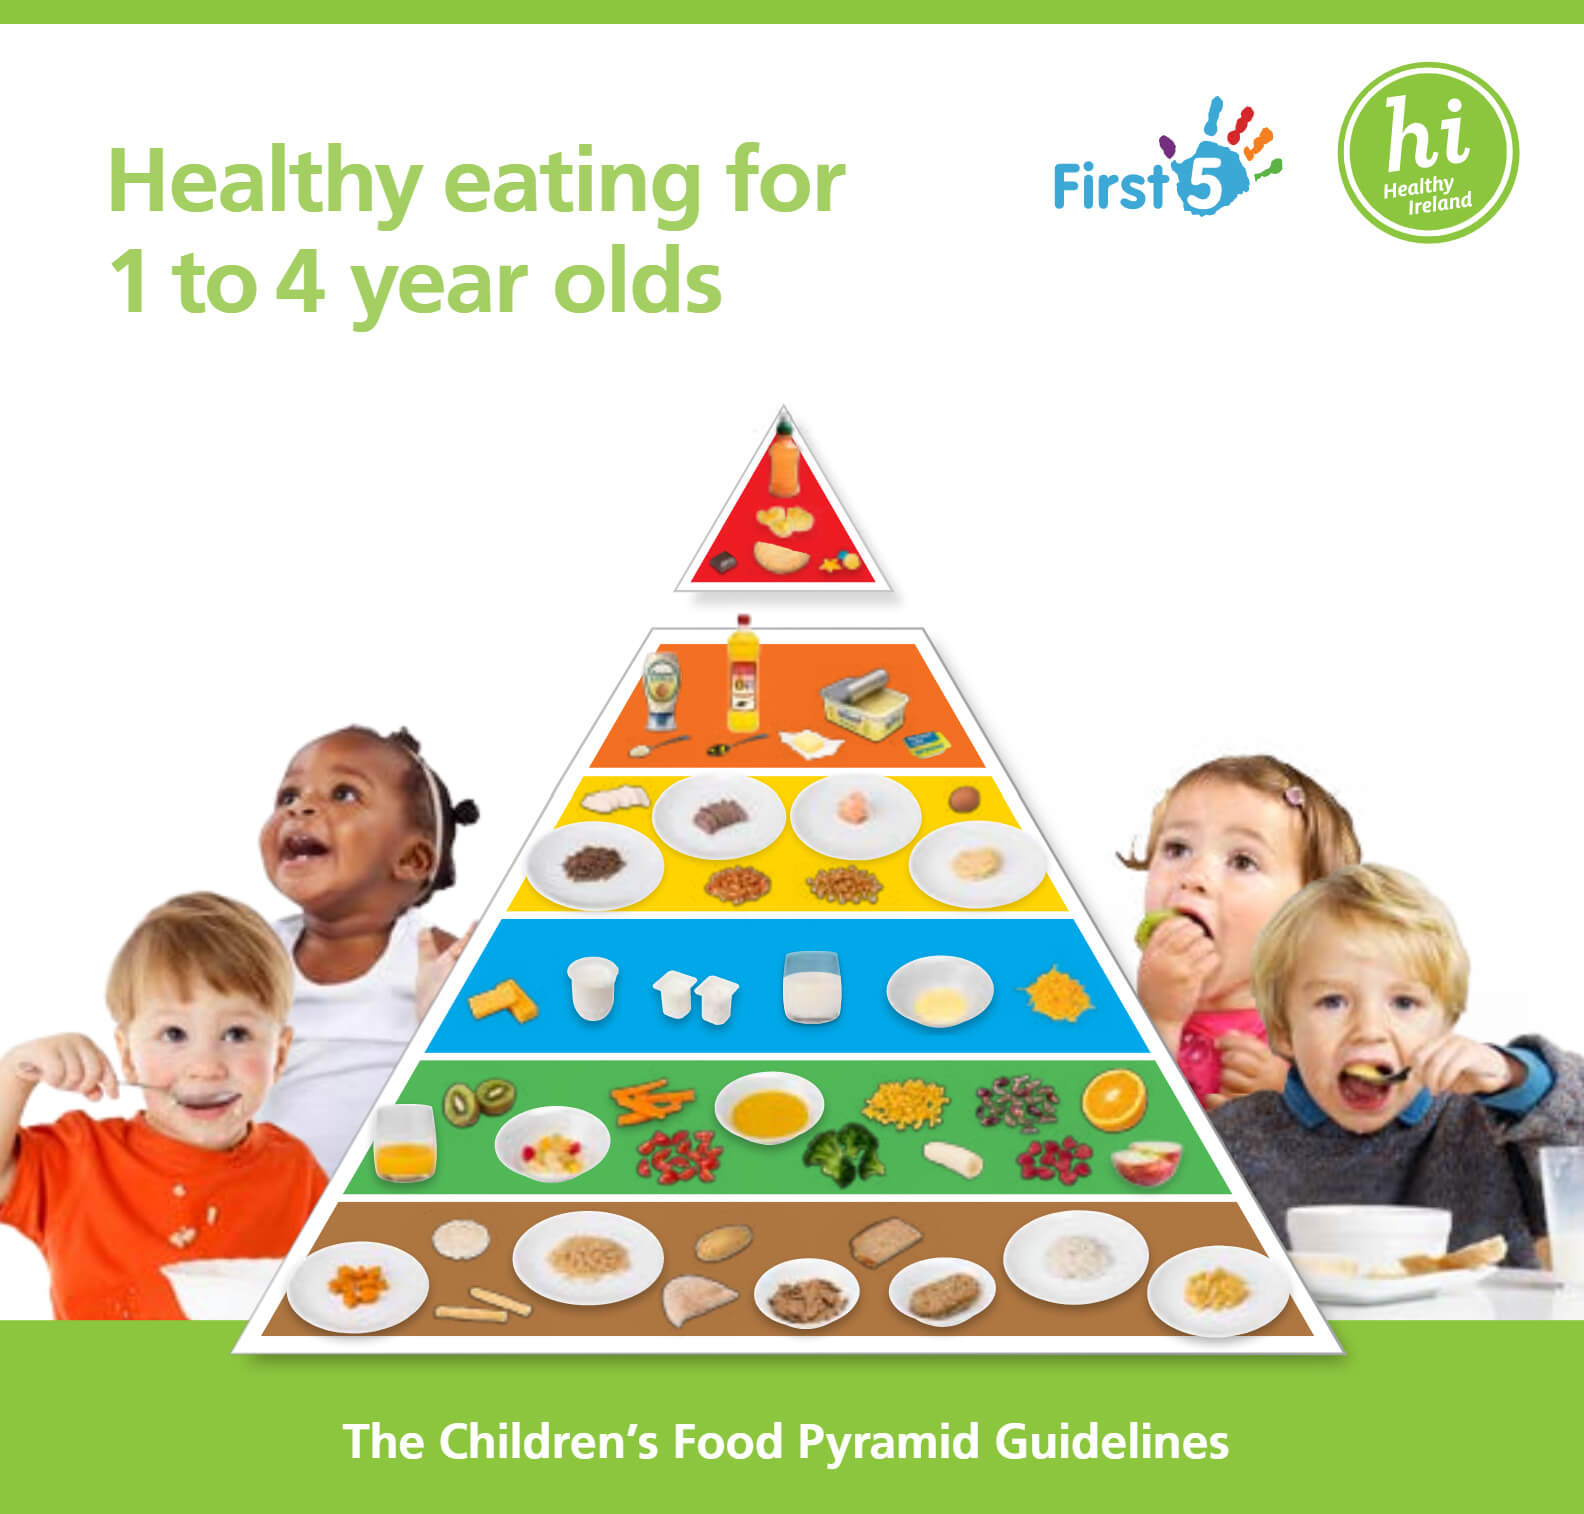 National Healthy Eating Guidelines for one to four year olds 